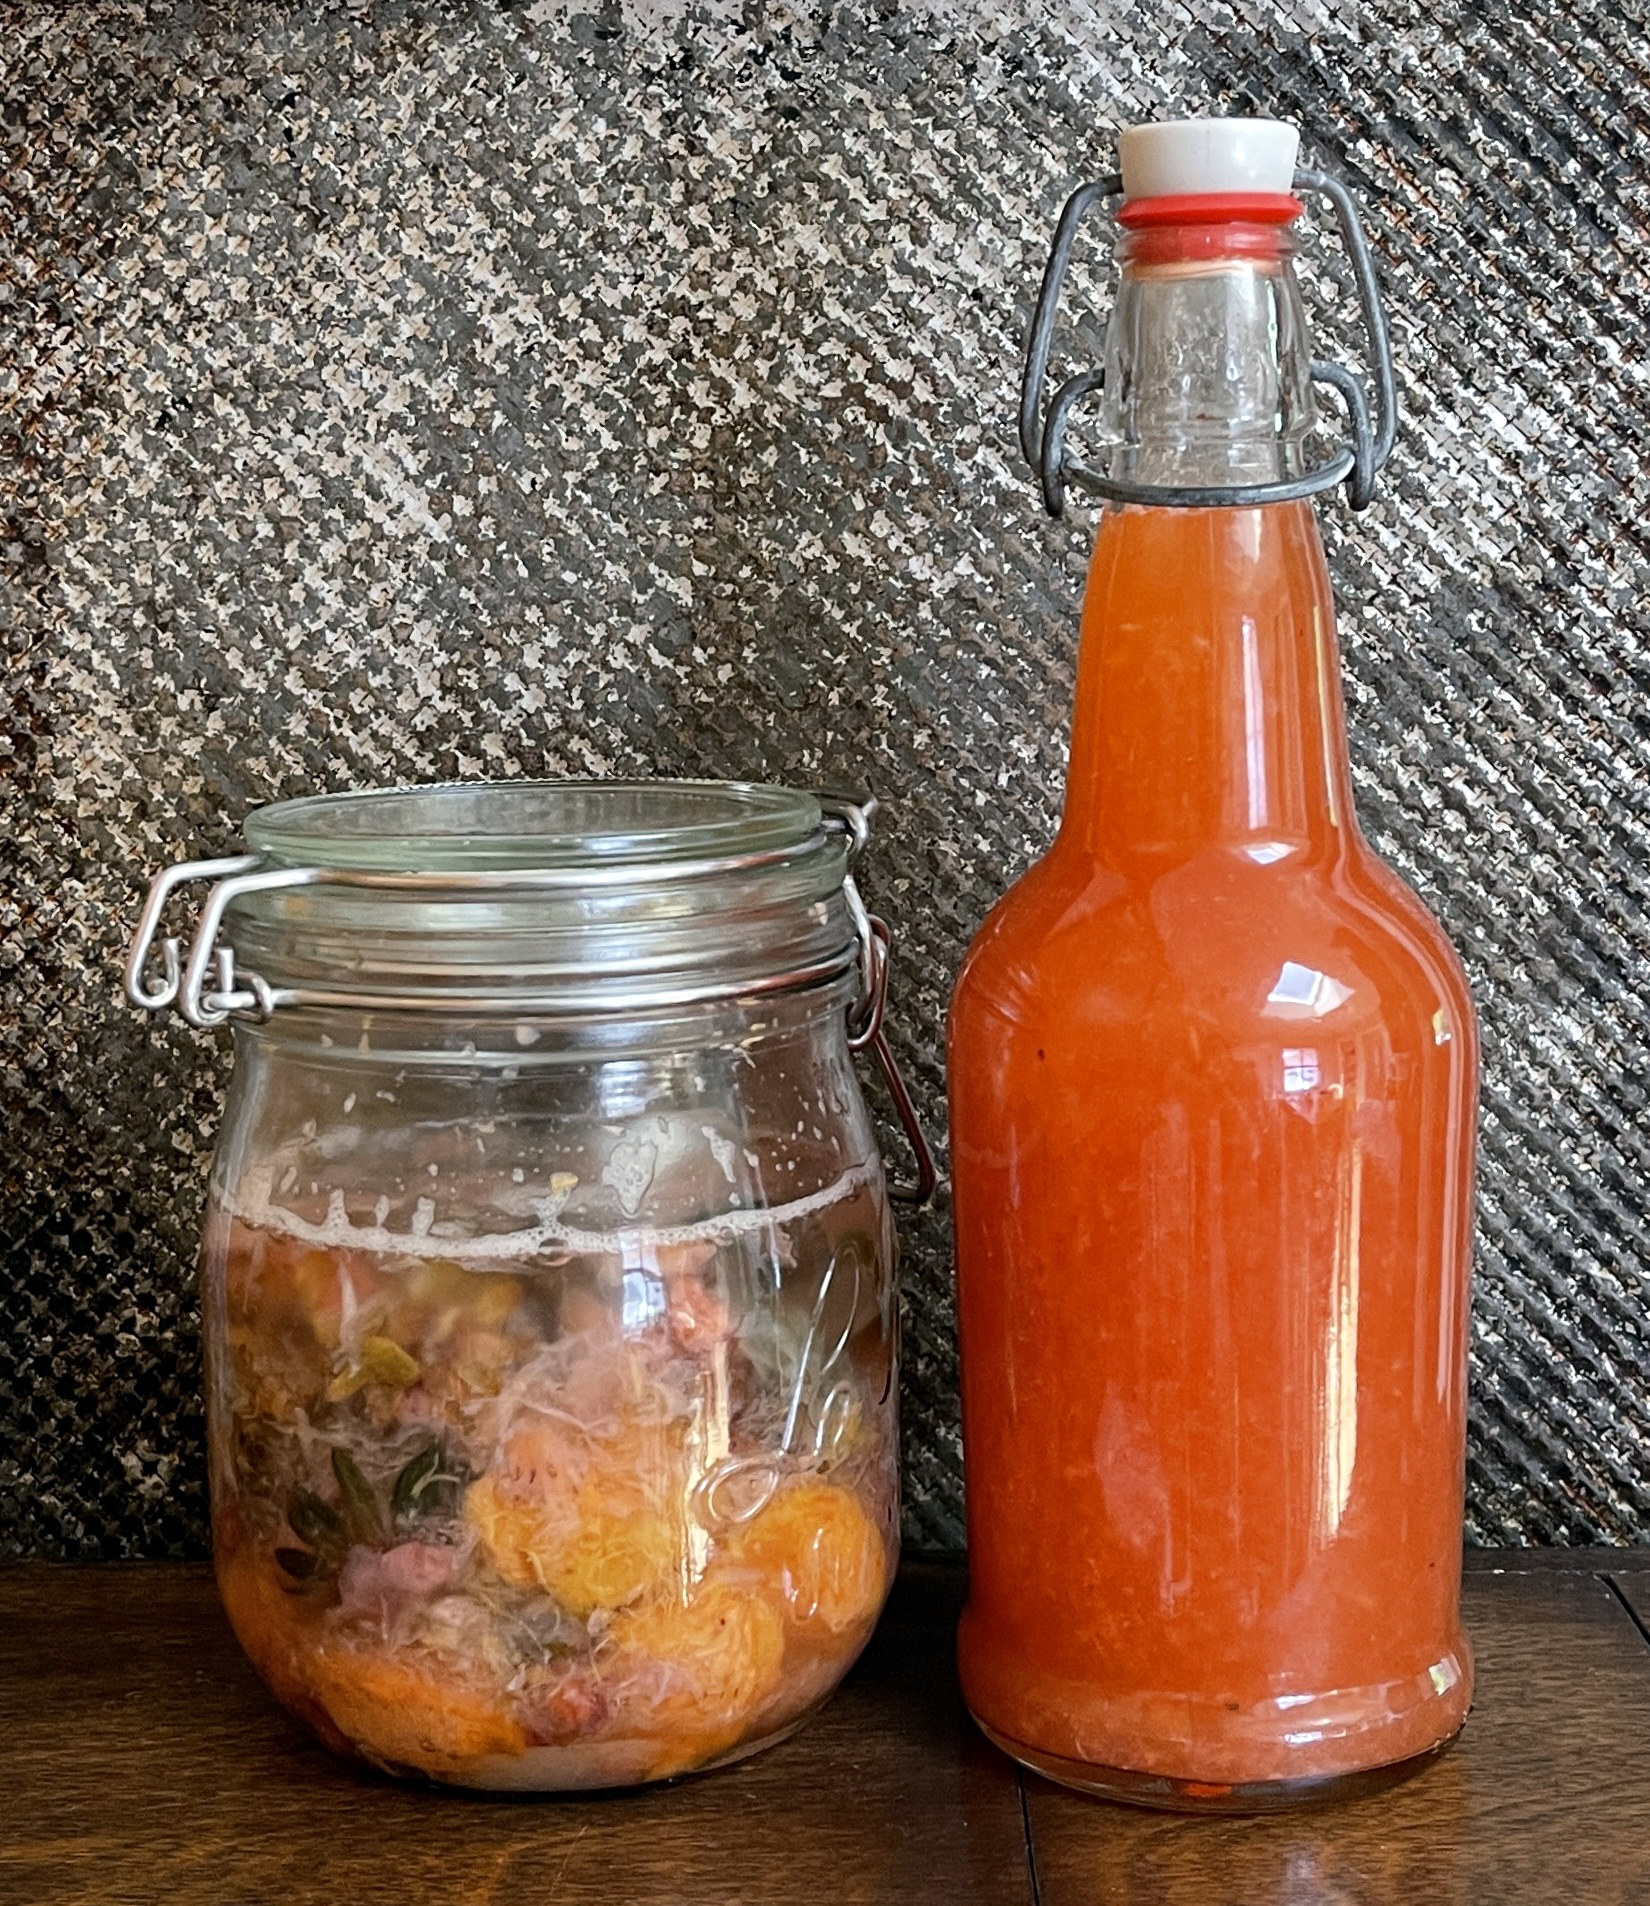 A jar of fermenting fruit scraps and a bottle of fruit kvass, ready to drink. The background is distressed grey metal. The jar and bottle are sitting on dark brown wood.